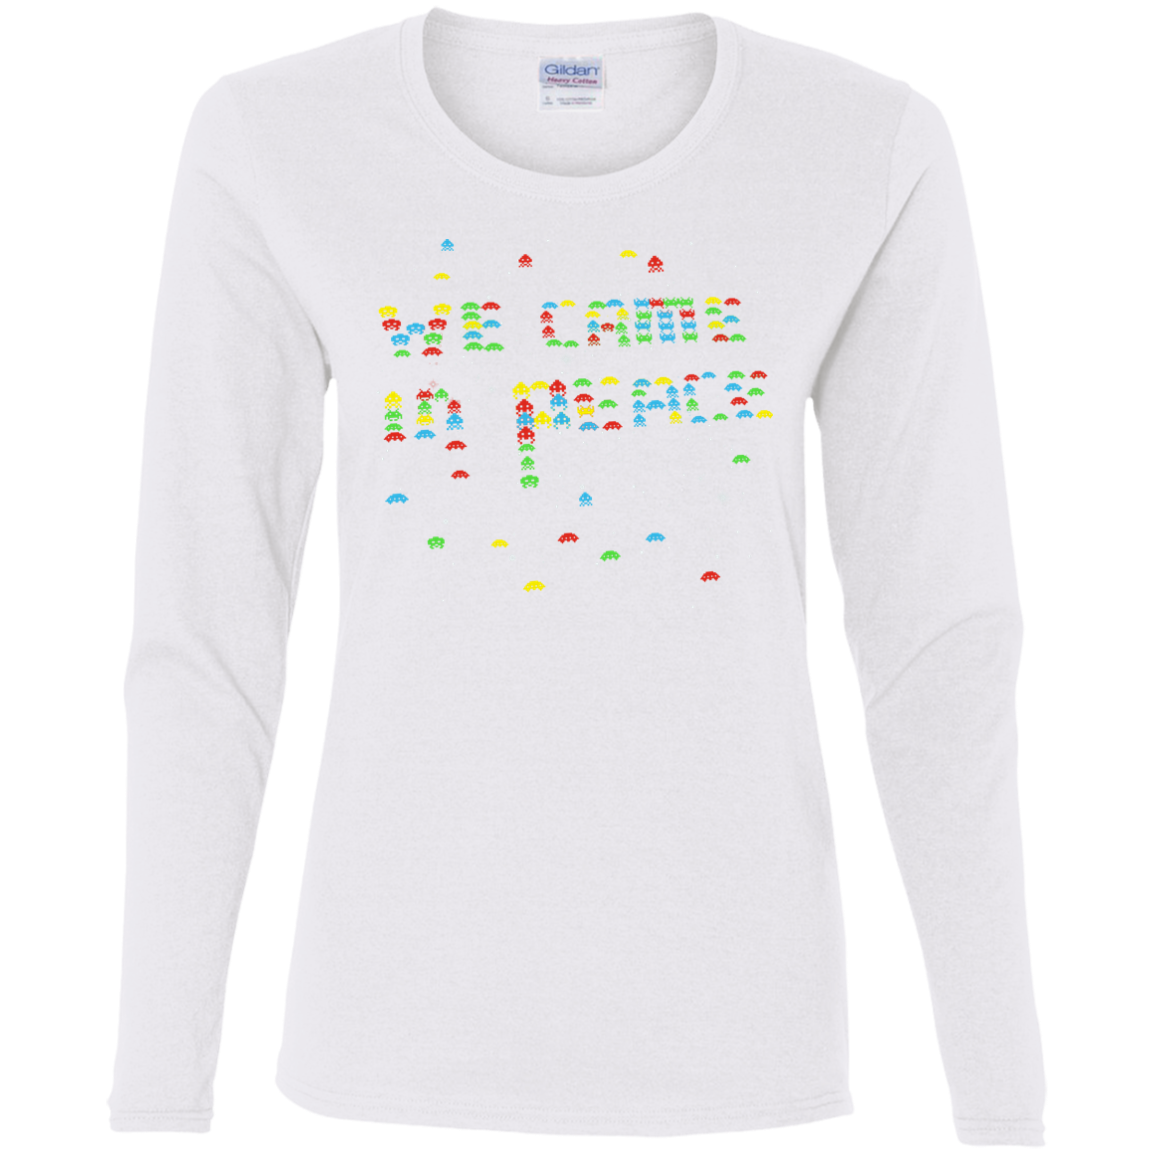 We came in peace Women's Long Sleeve T-Shirt